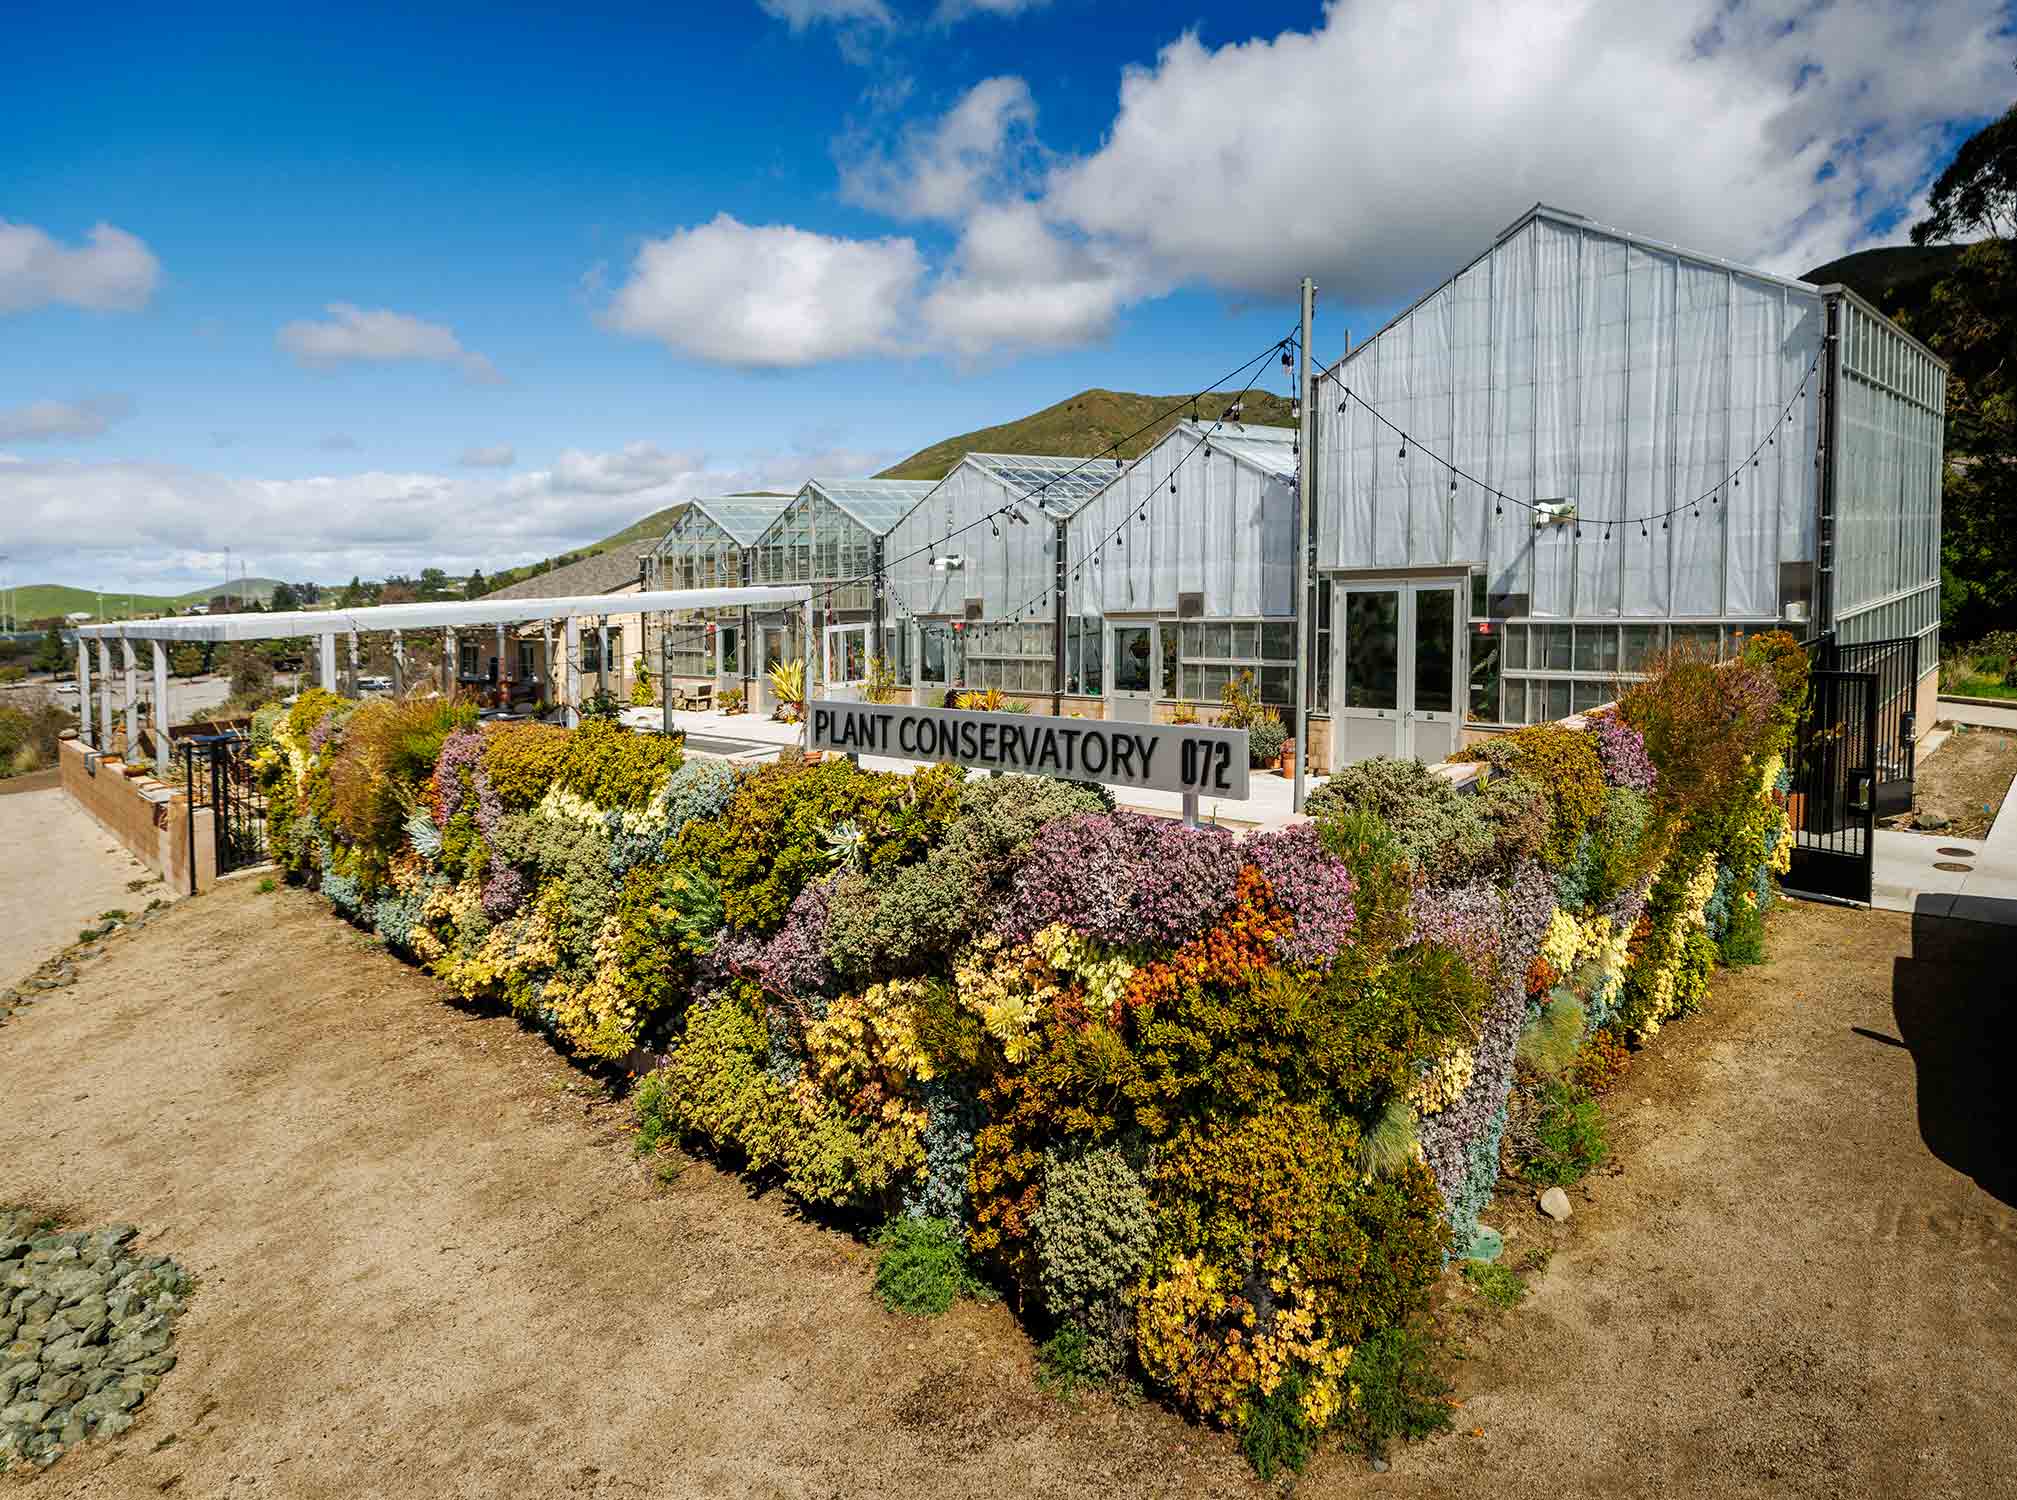 The Cal Poly Plant Conservatory building is surrounded by a living wall of flowering plants.